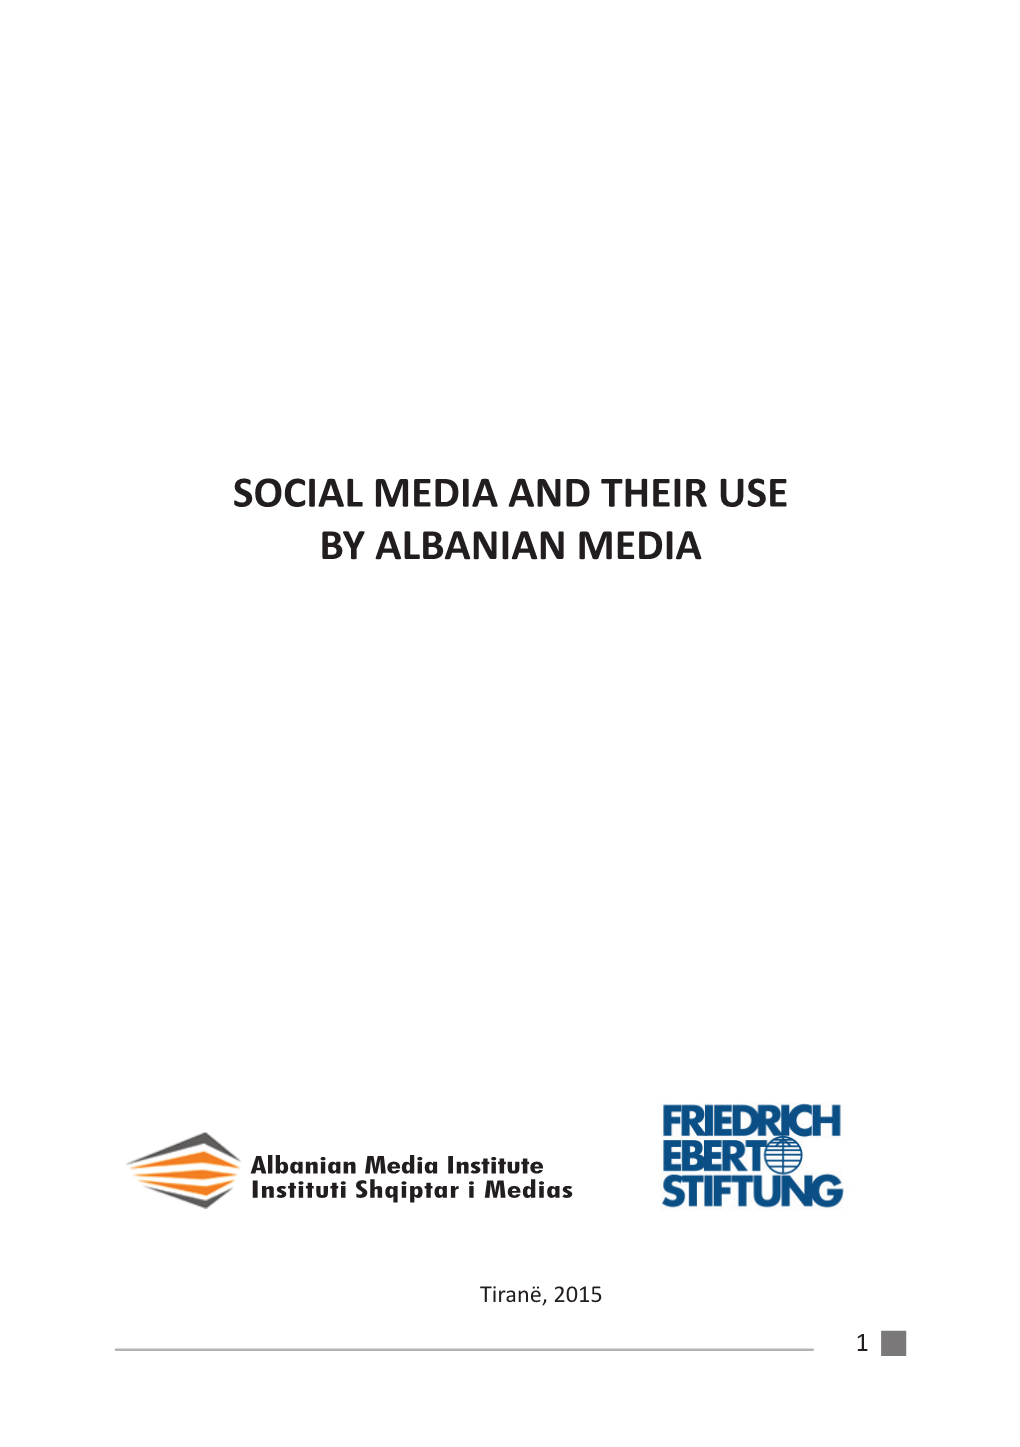 Social Media and Their Use by Albanian Media